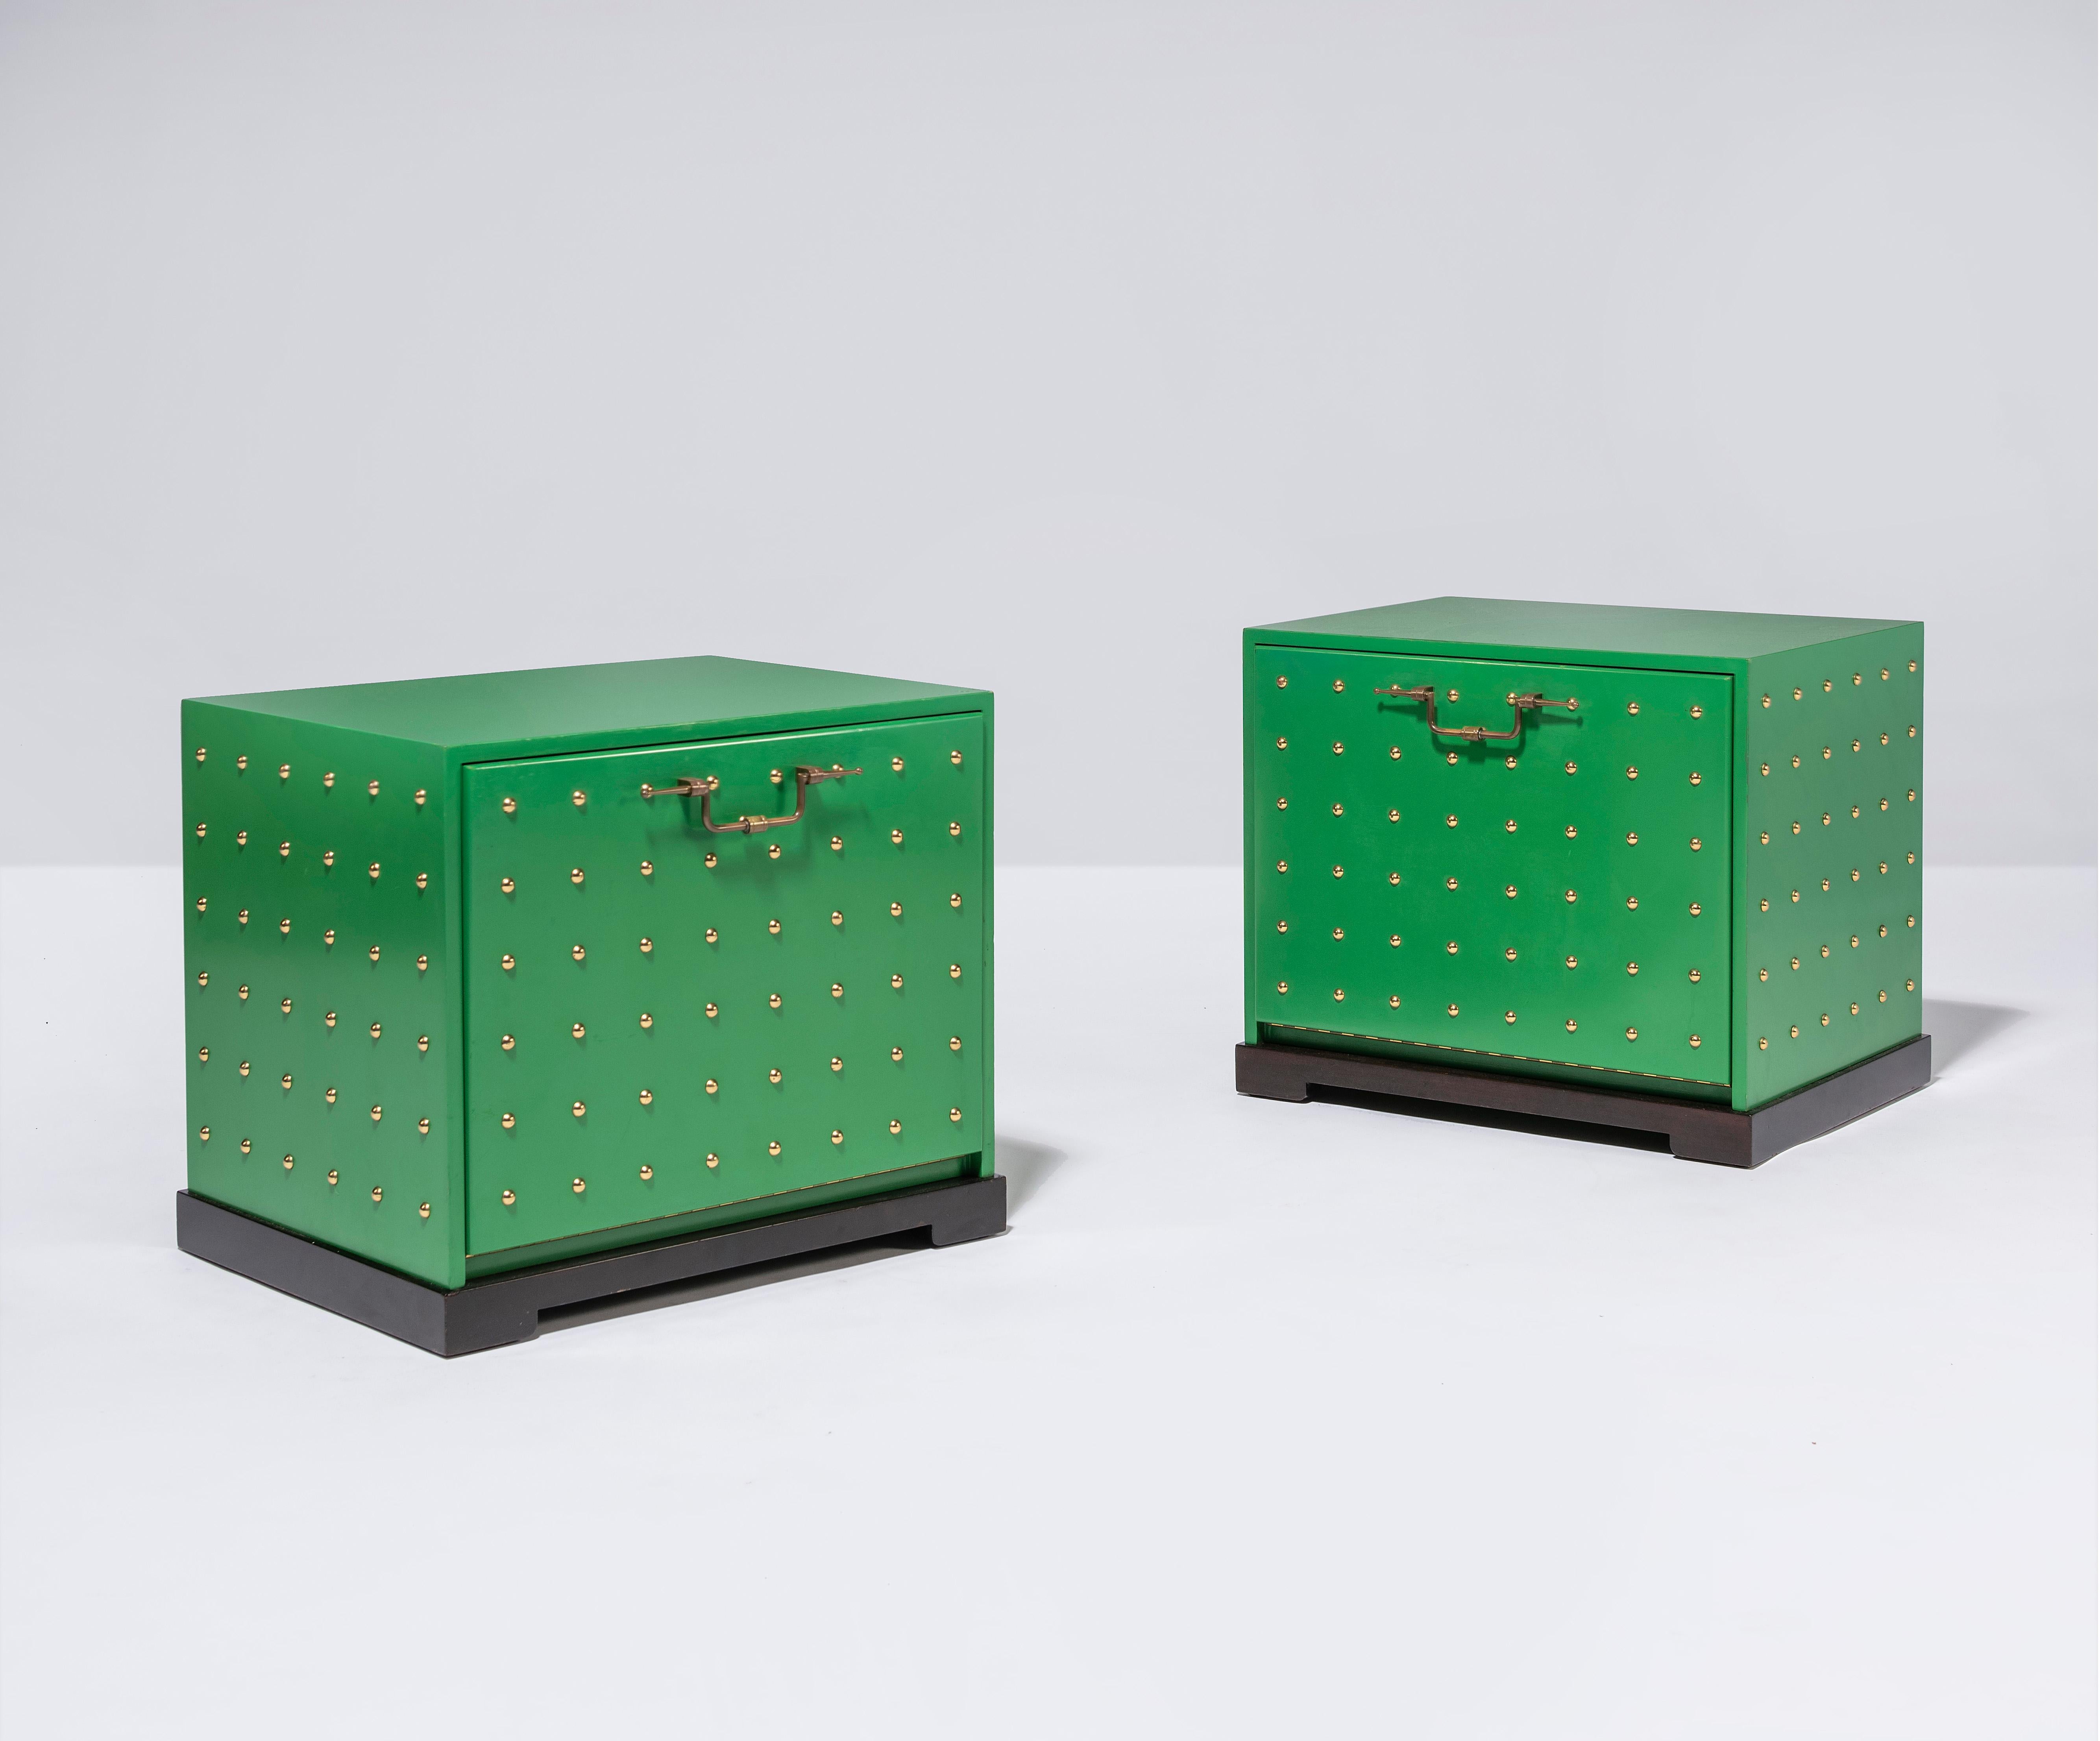 Pair of original green lacquered studded chests by Tommi Parzinger for Parzinger originals.

Chest can be used as nightstands or end tables.